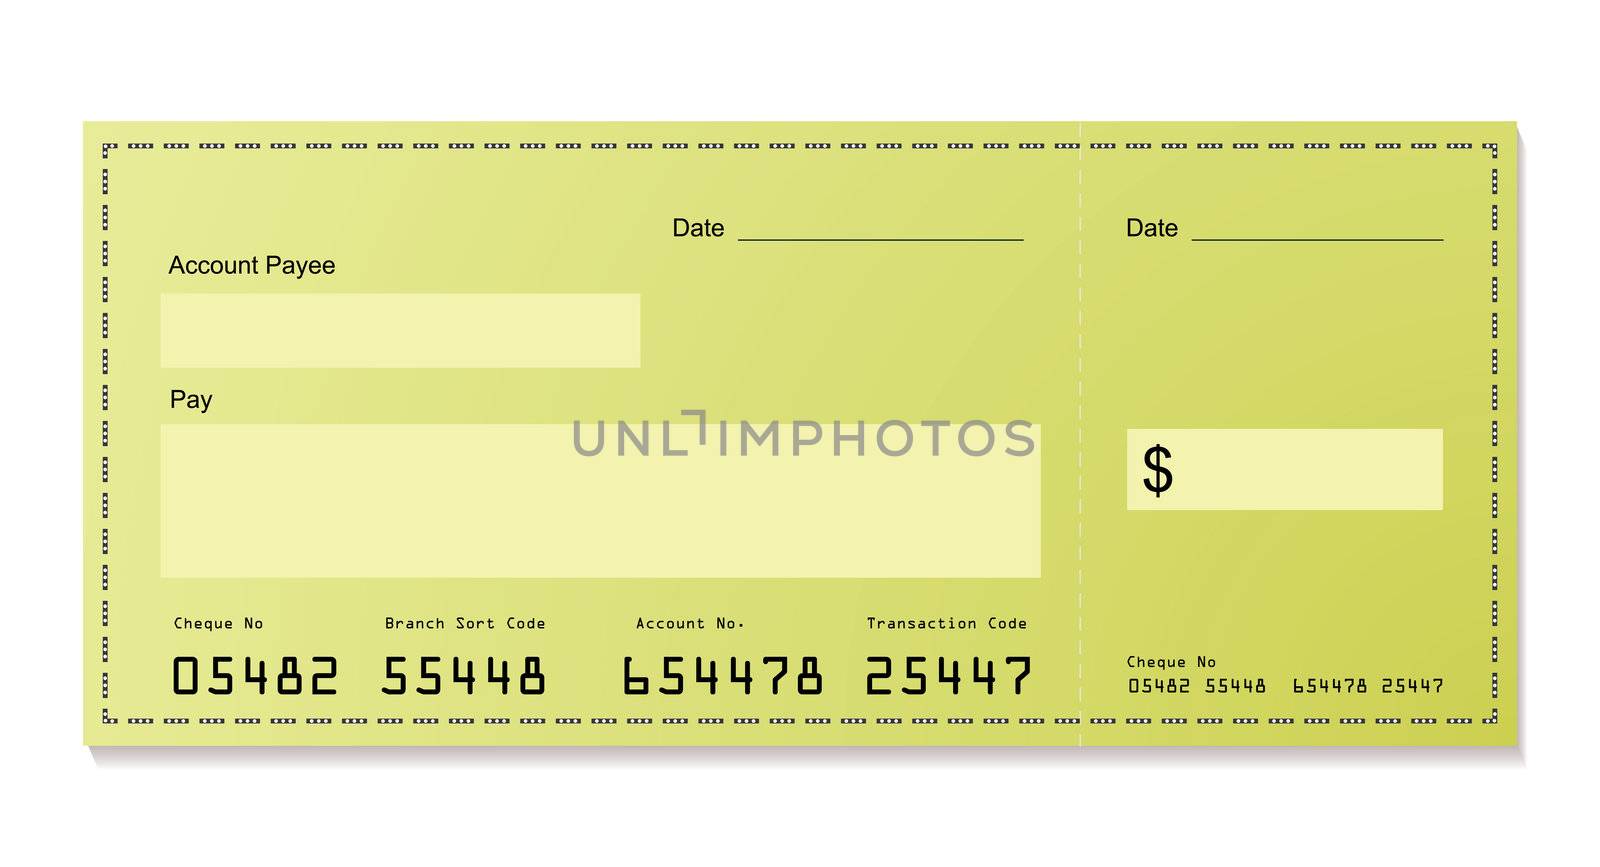 green dollar bank cheque with space for your own information